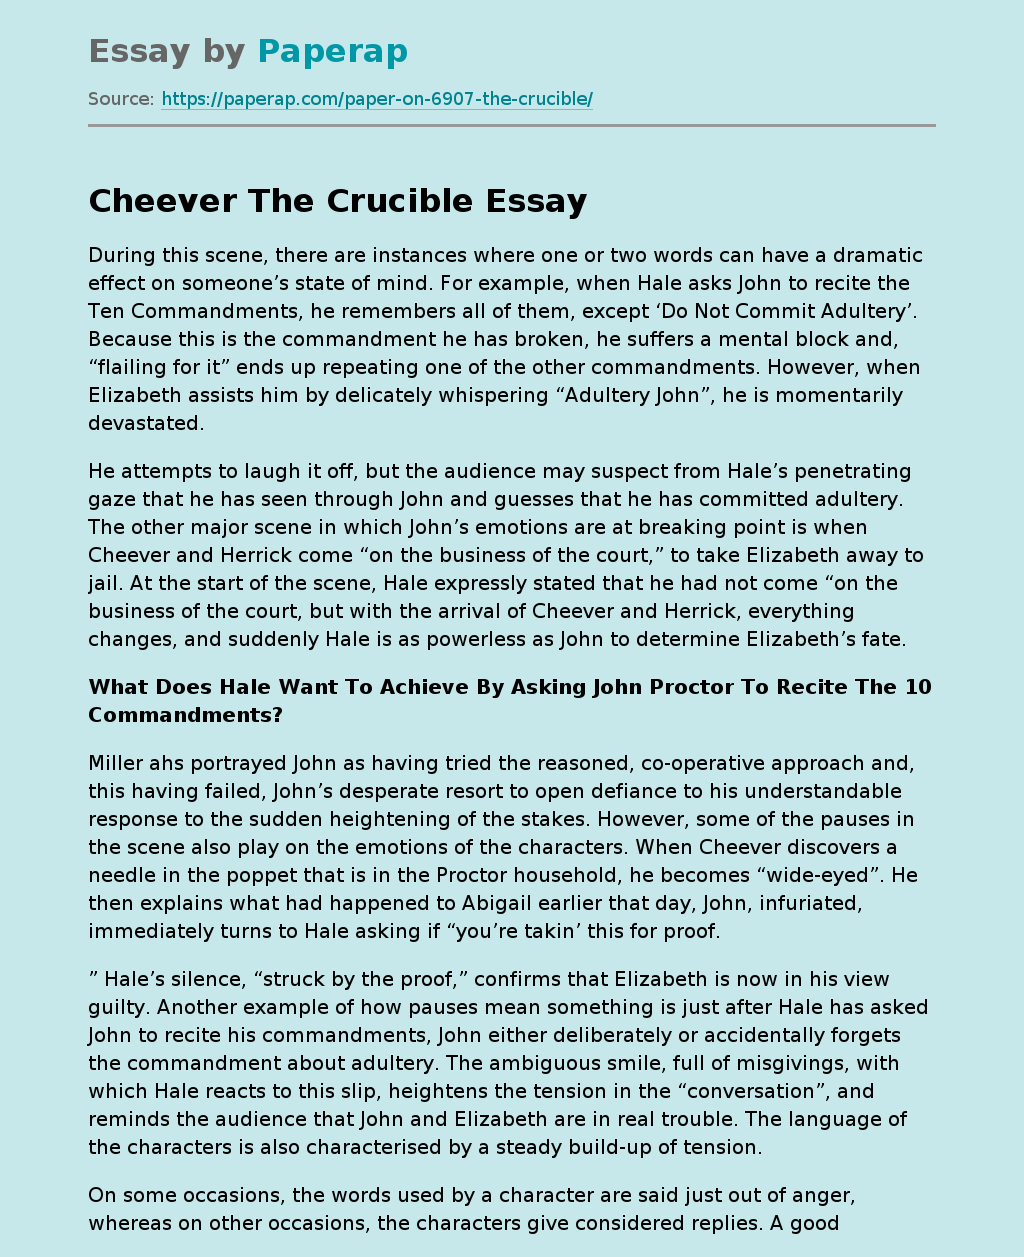 Cheever The Crucible